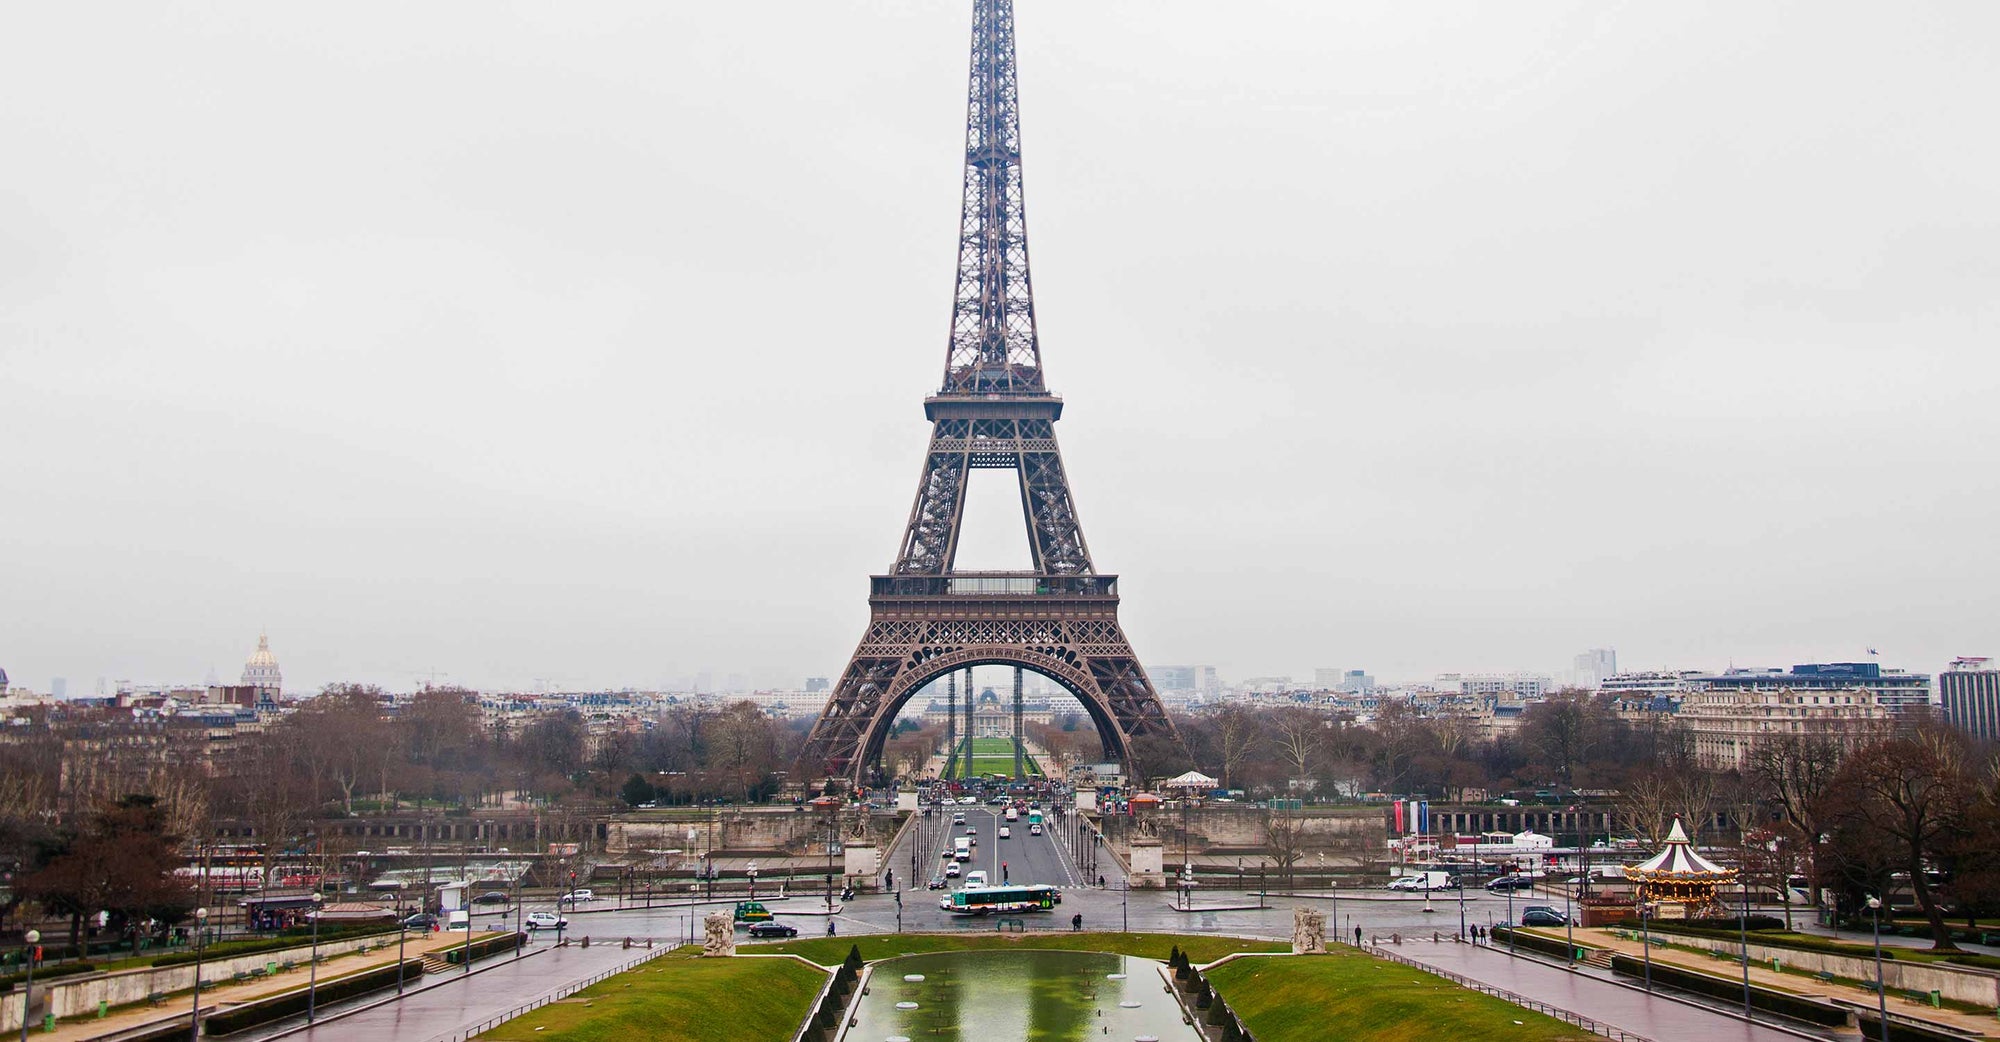 Eiffel Tower in Paris on a rainy day with clearly hazy background.